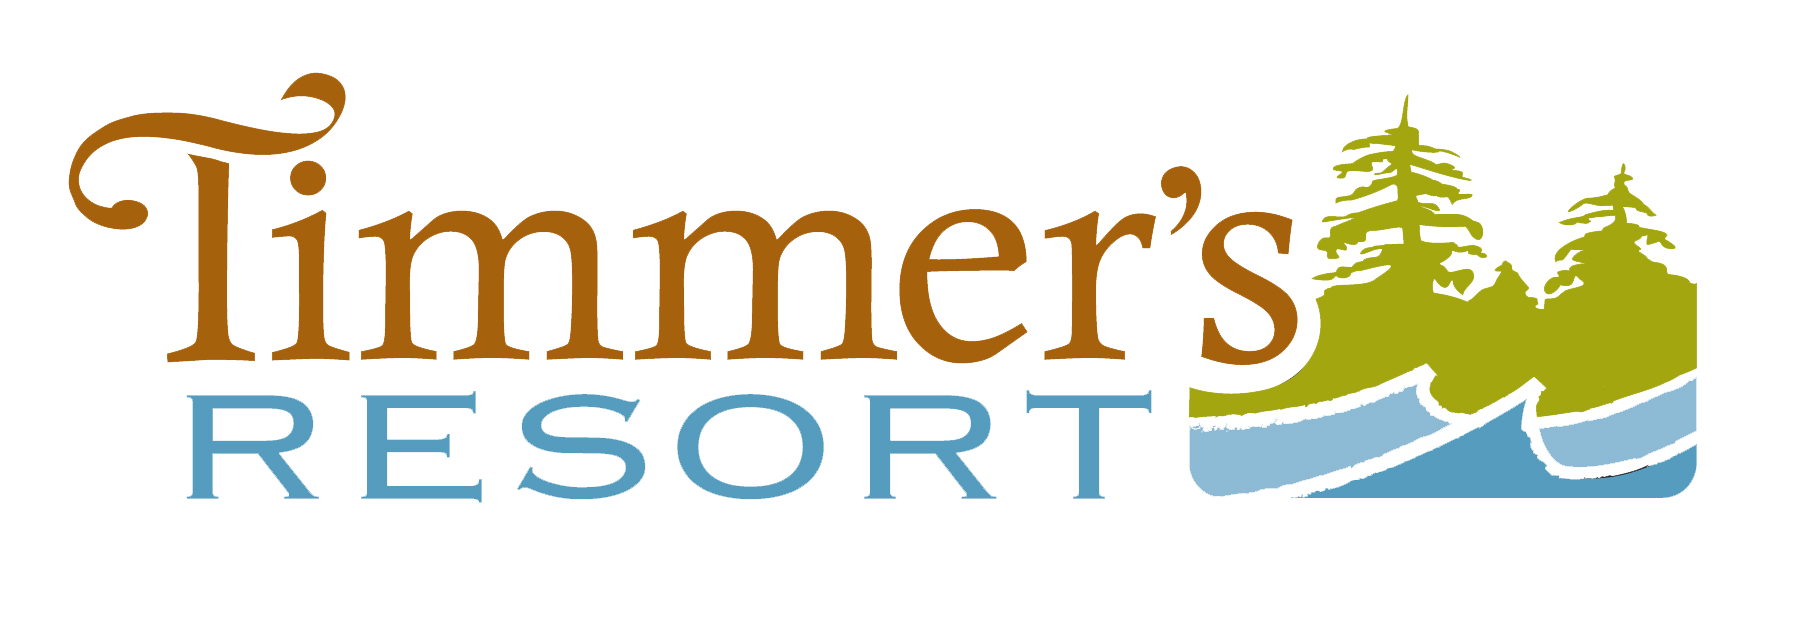 Timmers_Resort_Logo.png